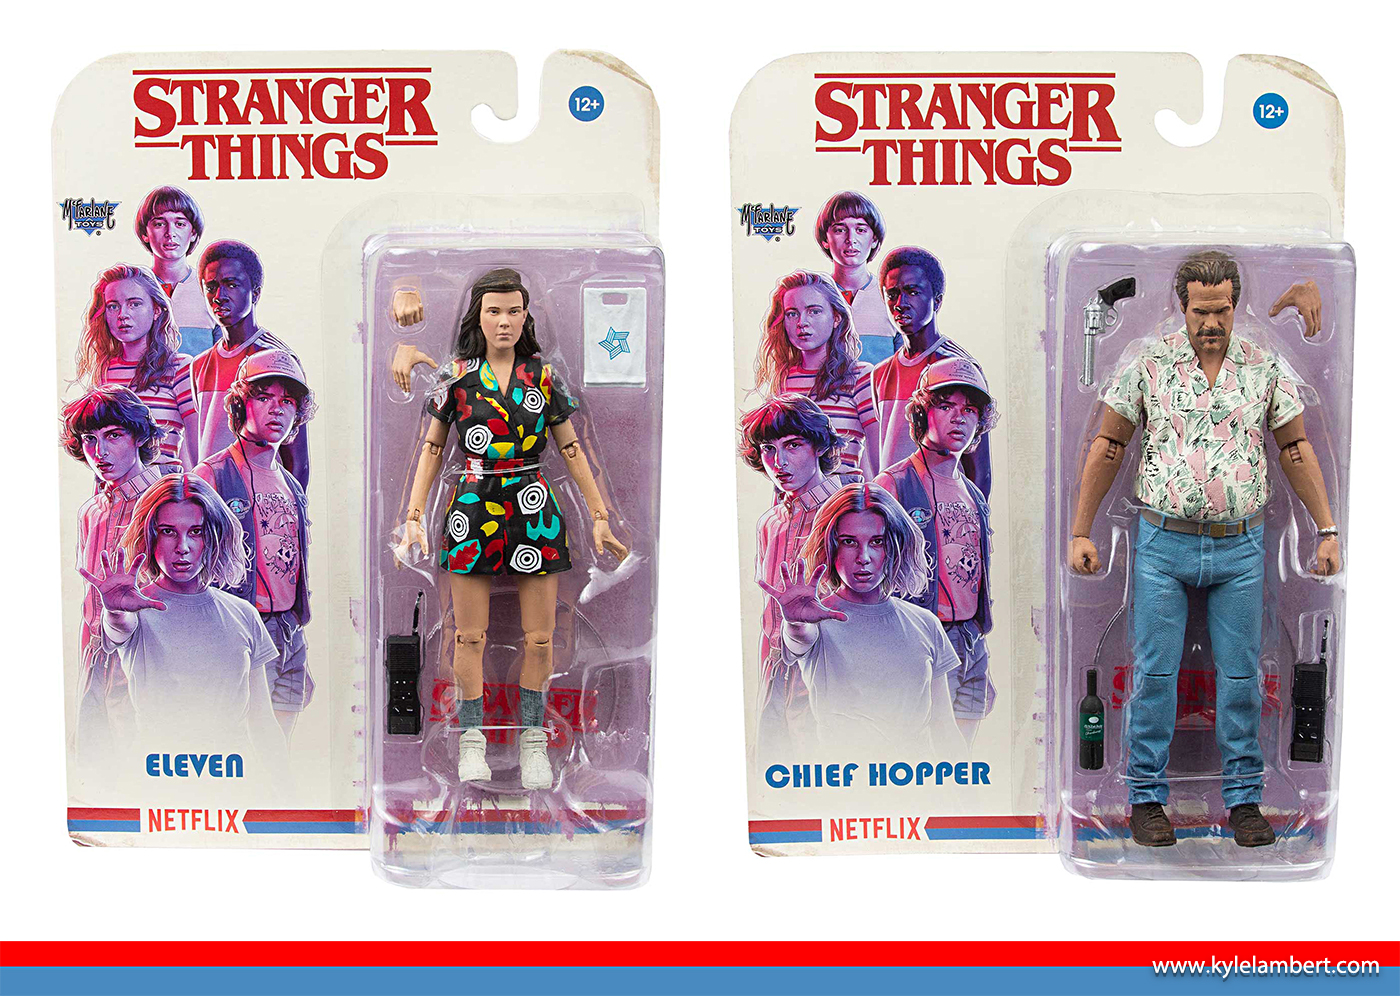 A Guide to All the Stranger Things 3 Merch and Promotions